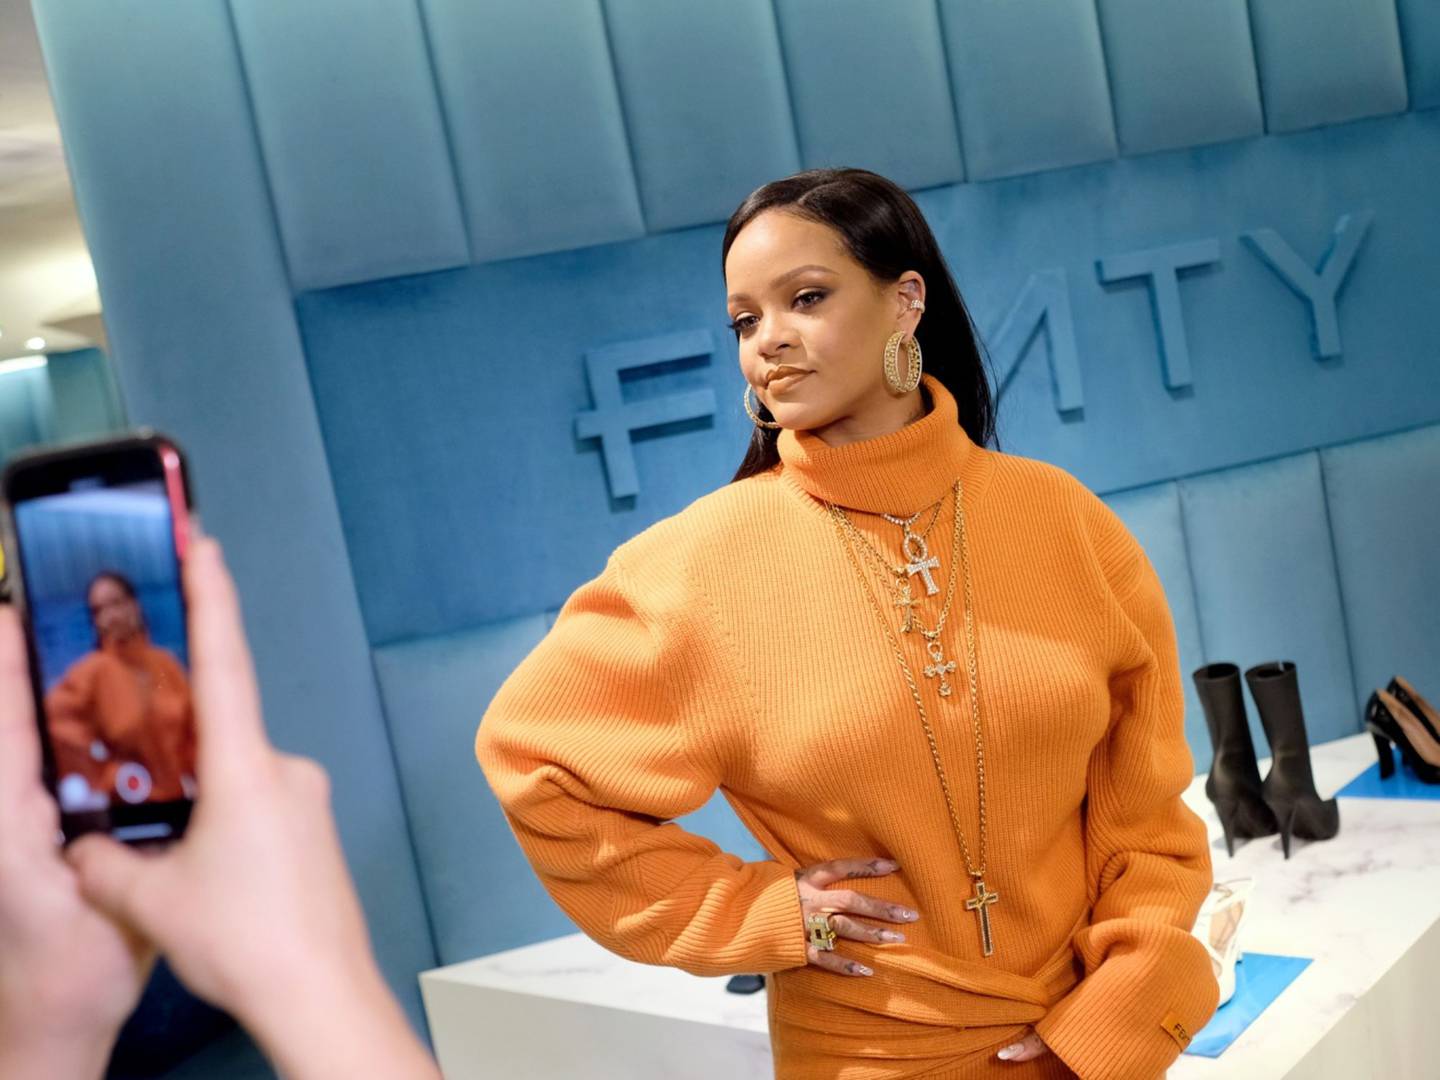 Rihanna at the launch of one of the Fentydfd products